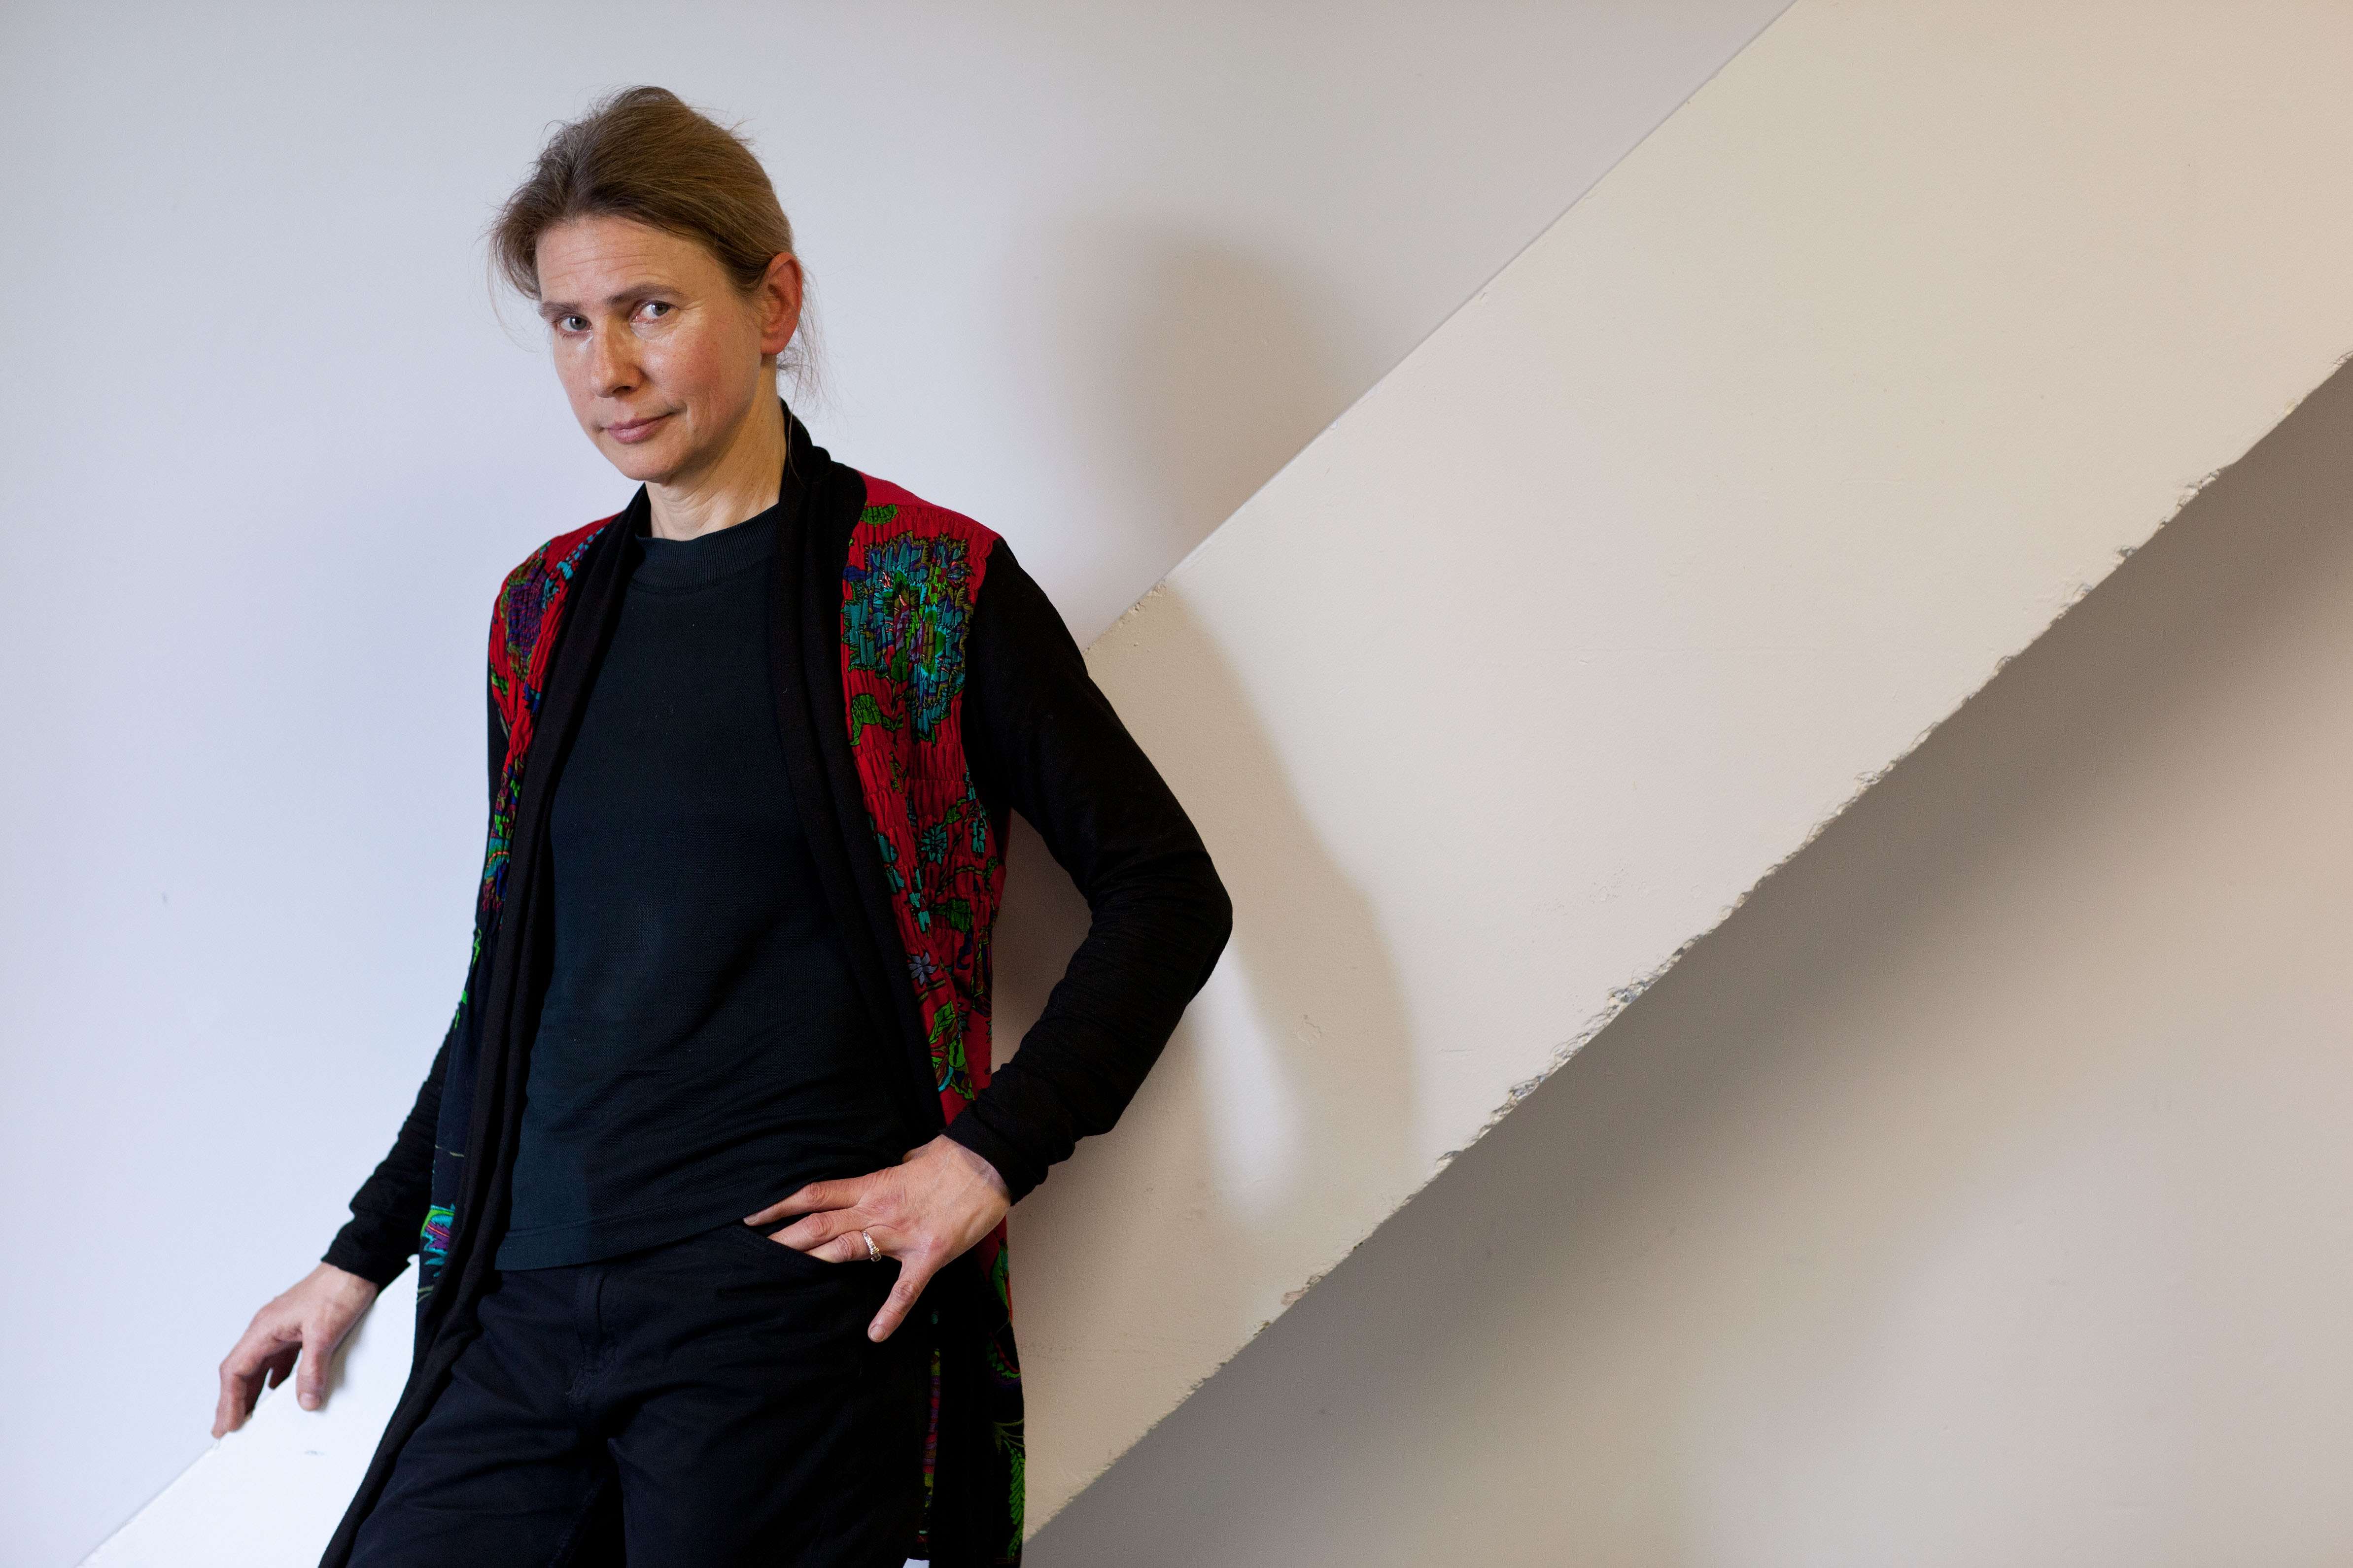 Author Lionel Shriver at the London Book Fair on April 15, 2013. (David Levenson—Getty Images)